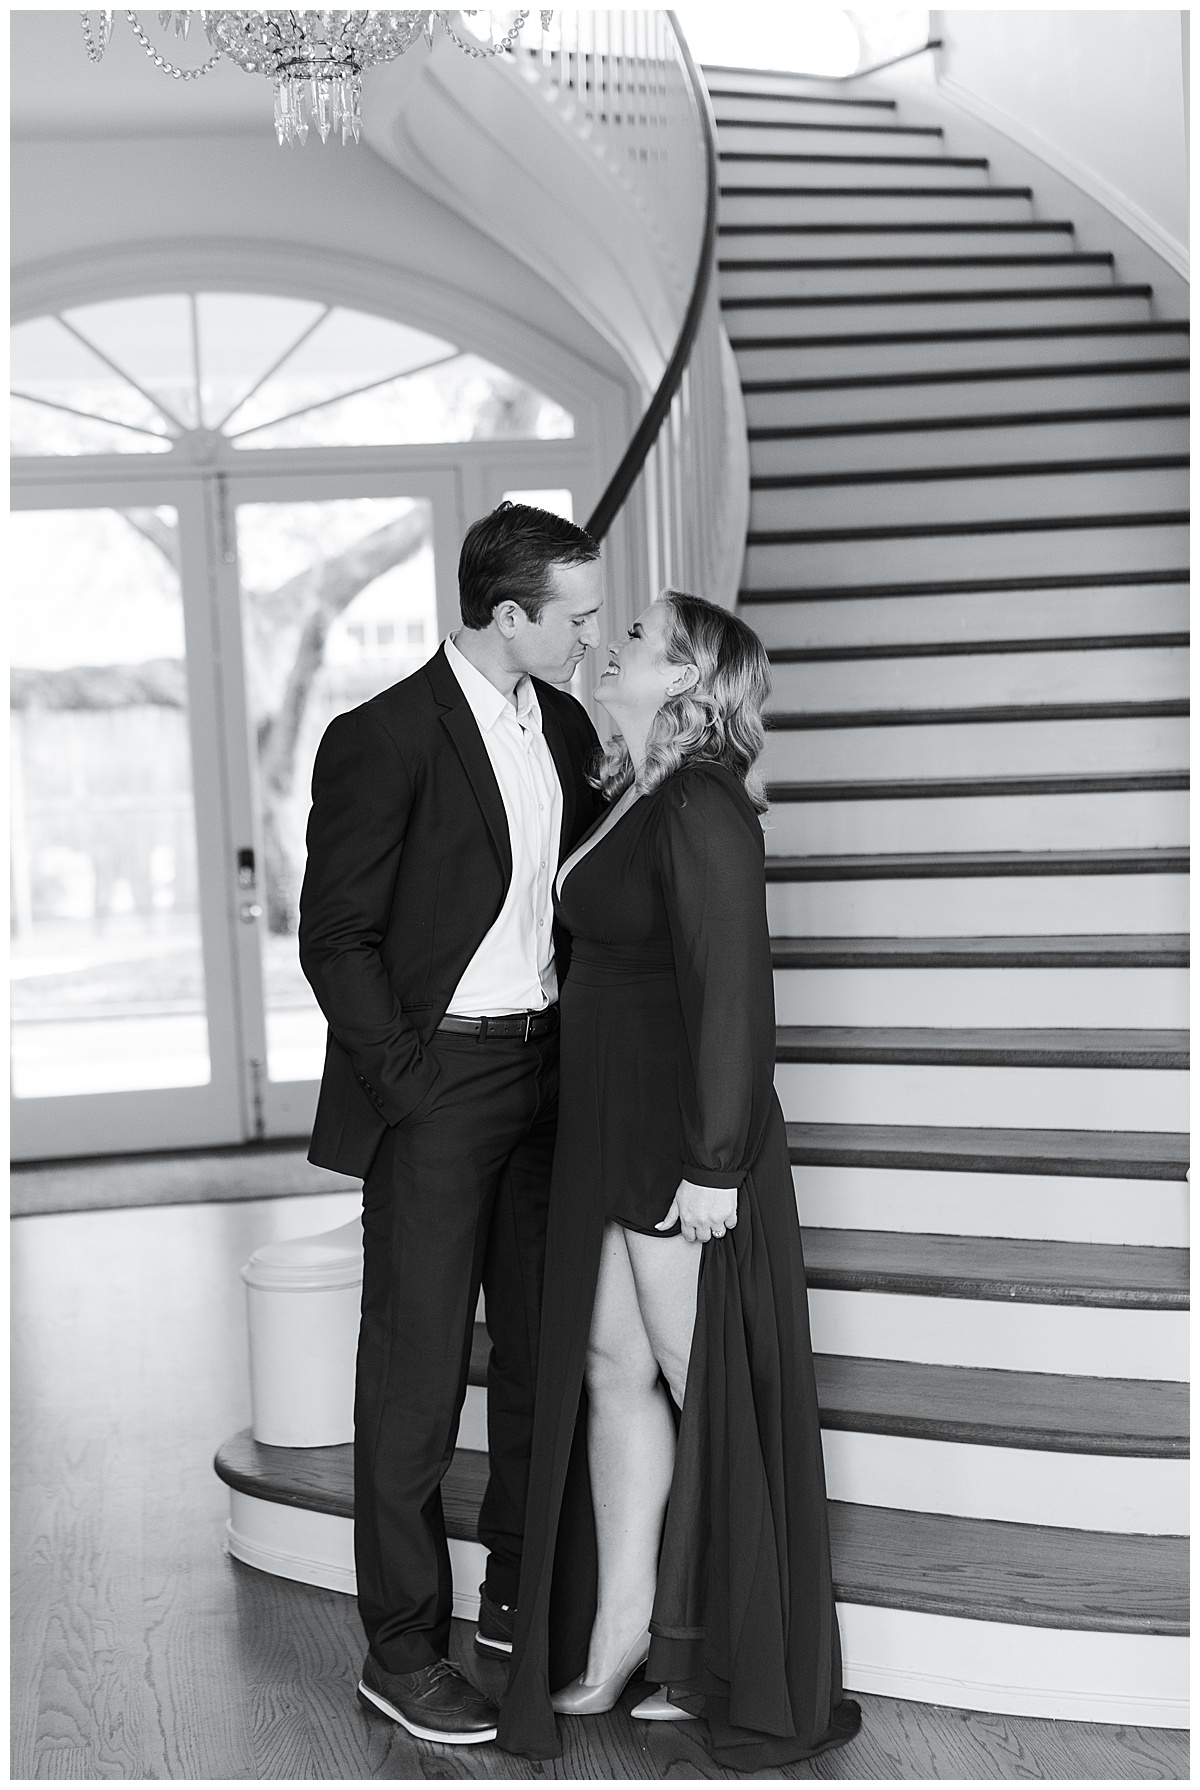 Man and woman stare into each others eyes near stairs for Houston’s Best Wedding Photographers